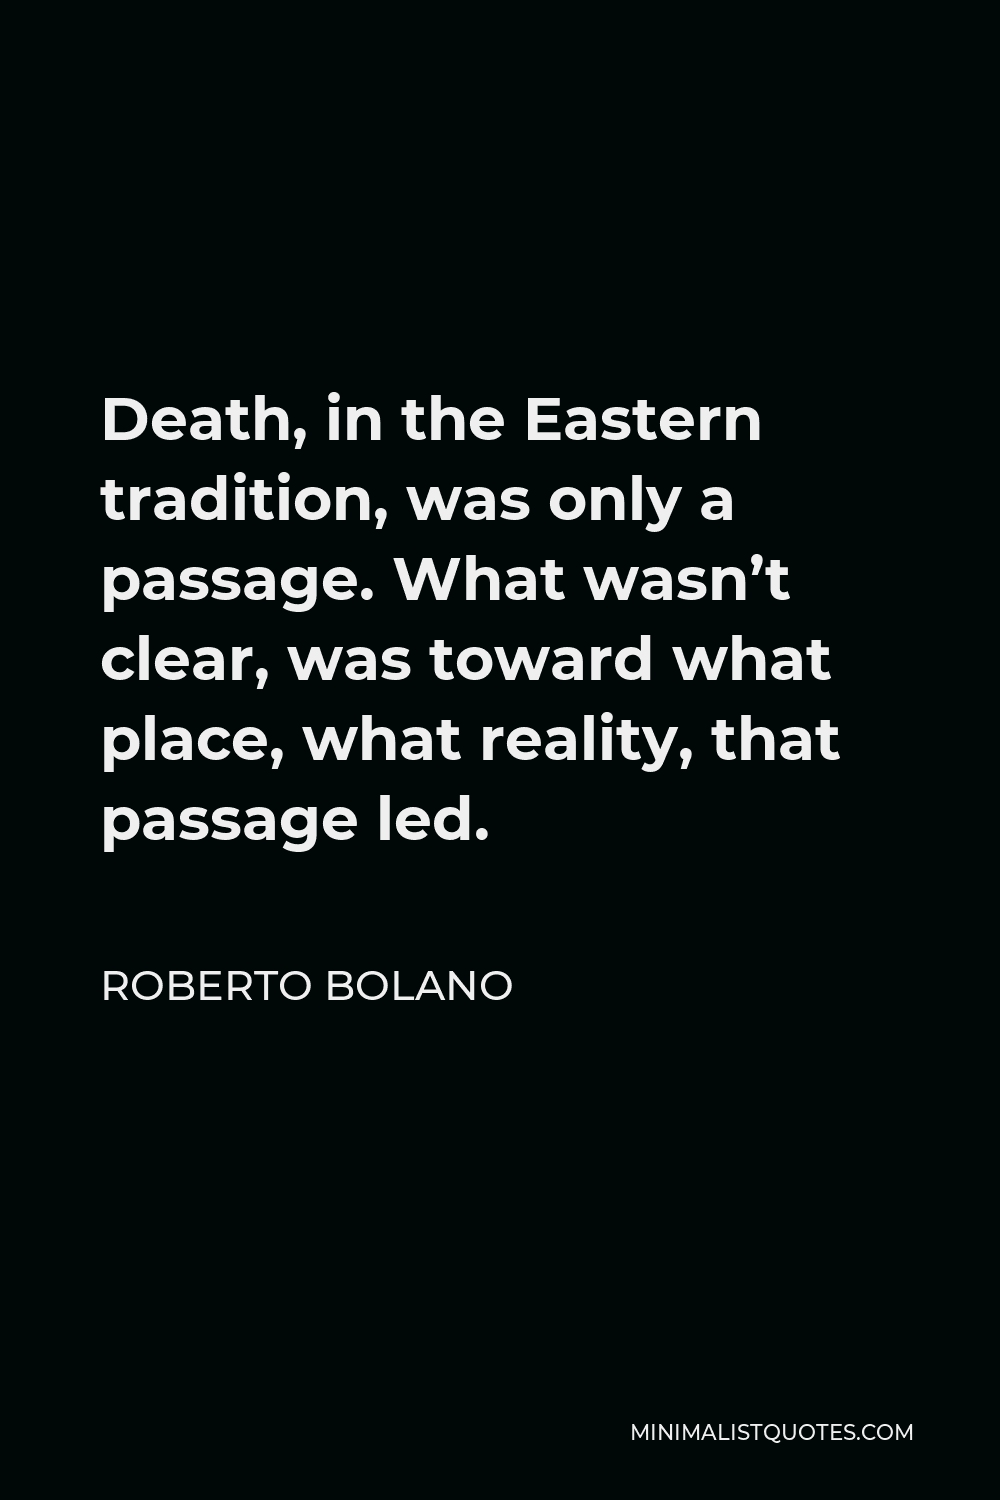 Roberto Bolano Quote - Death, in the Eastern tradition, was only a passage. What wasn’t clear, was toward what place, what reality, that passage led.